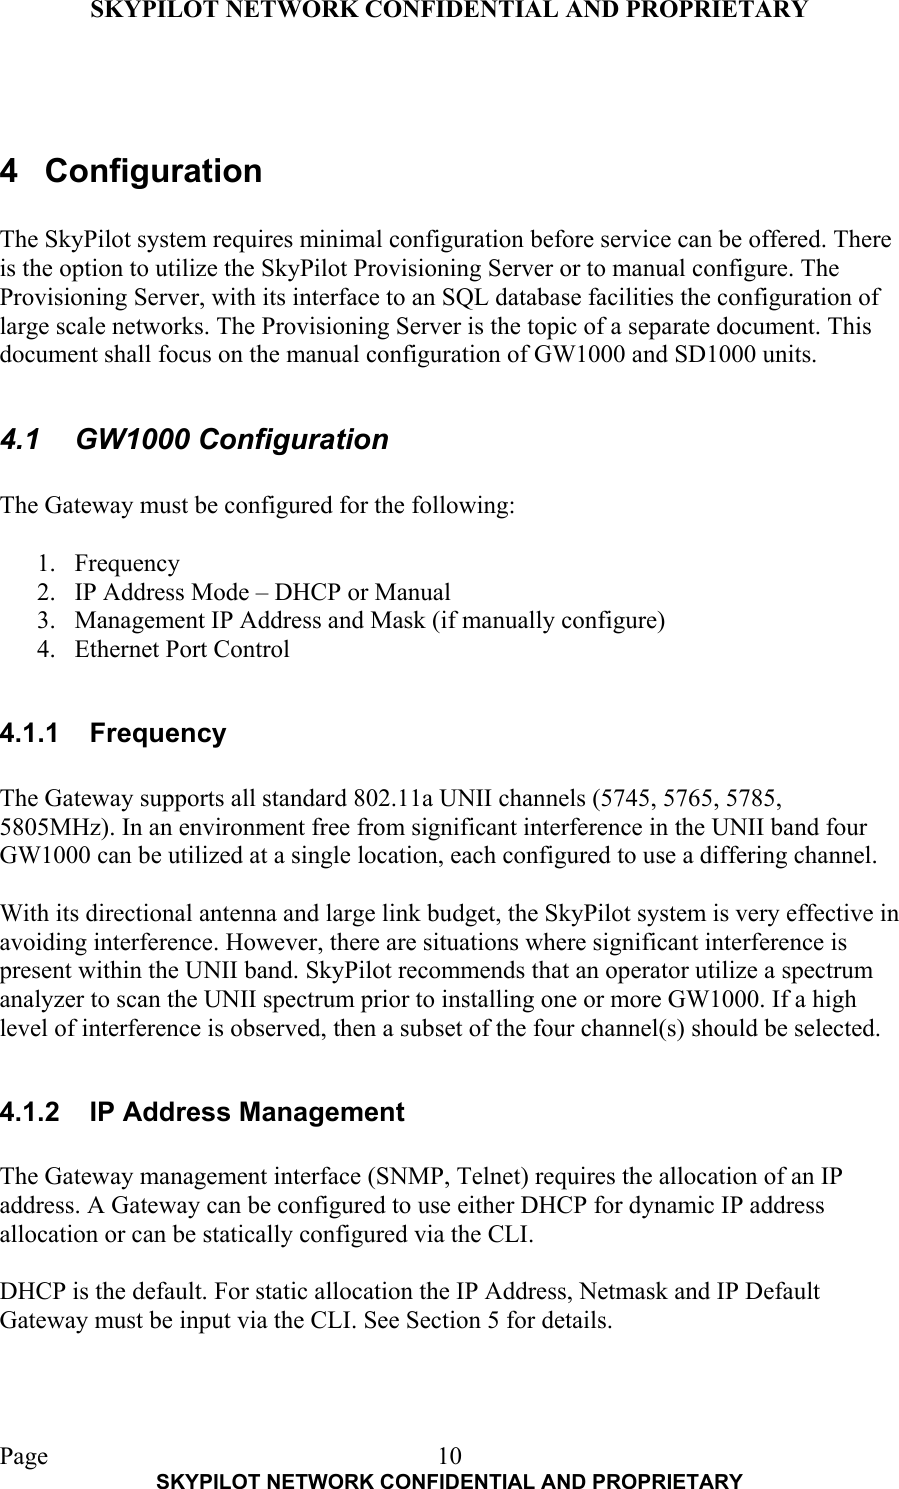 SKYPILOT NETWORK CONFIDENTIAL AND PROPRIETARY  Page    SKYPILOT NETWORK CONFIDENTIAL AND PROPRIETARY 10  4 Configuration  The SkyPilot system requires minimal configuration before service can be offered. There is the option to utilize the SkyPilot Provisioning Server or to manual configure. The Provisioning Server, with its interface to an SQL database facilities the configuration of large scale networks. The Provisioning Server is the topic of a separate document. This document shall focus on the manual configuration of GW1000 and SD1000 units.  4.1 GW1000 Configuration  The Gateway must be configured for the following:  1. Frequency 2.  IP Address Mode – DHCP or Manual 3.  Management IP Address and Mask (if manually configure) 4.  Ethernet Port Control  4.1.1 Frequency  The Gateway supports all standard 802.11a UNII channels (5745, 5765, 5785, 5805MHz). In an environment free from significant interference in the UNII band four GW1000 can be utilized at a single location, each configured to use a differing channel.   With its directional antenna and large link budget, the SkyPilot system is very effective in avoiding interference. However, there are situations where significant interference is present within the UNII band. SkyPilot recommends that an operator utilize a spectrum analyzer to scan the UNII spectrum prior to installing one or more GW1000. If a high level of interference is observed, then a subset of the four channel(s) should be selected.   4.1.2  IP Address Management  The Gateway management interface (SNMP, Telnet) requires the allocation of an IP address. A Gateway can be configured to use either DHCP for dynamic IP address allocation or can be statically configured via the CLI.   DHCP is the default. For static allocation the IP Address, Netmask and IP Default Gateway must be input via the CLI. See Section 5 for details.   